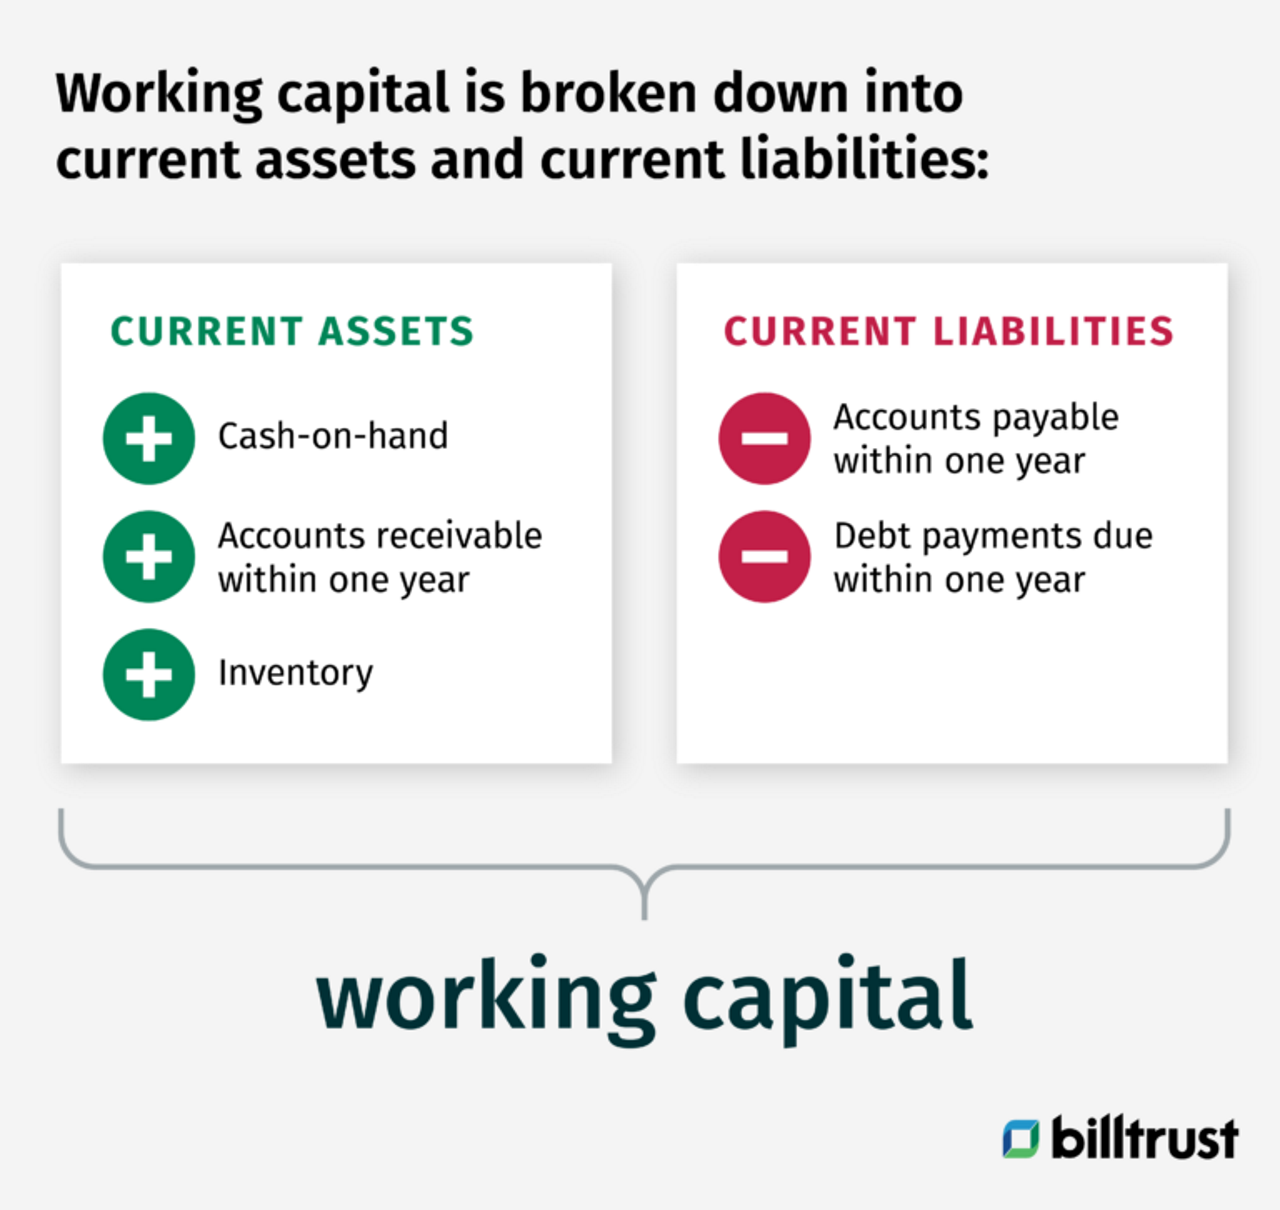 diagram showing how the working capital is broken down into current assets and liabilities